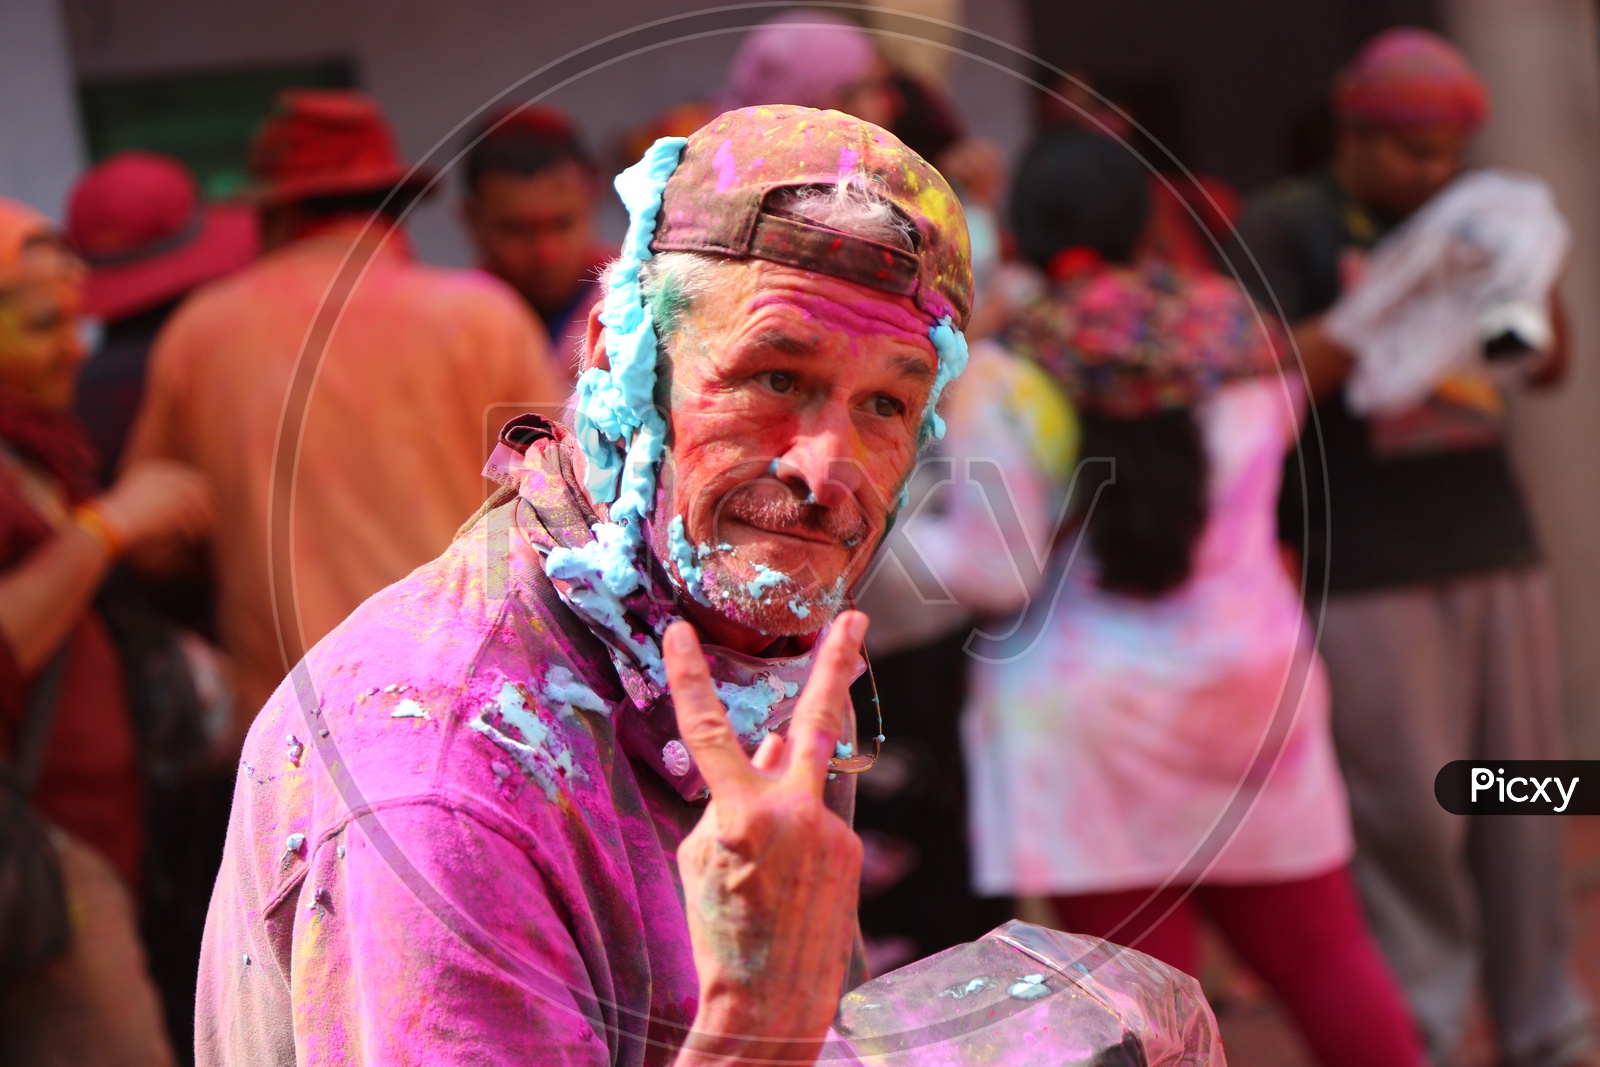 Old Man with colors on his face - Holi Celebrations - Indian Festival - Colors/Colorful at Nandagaon